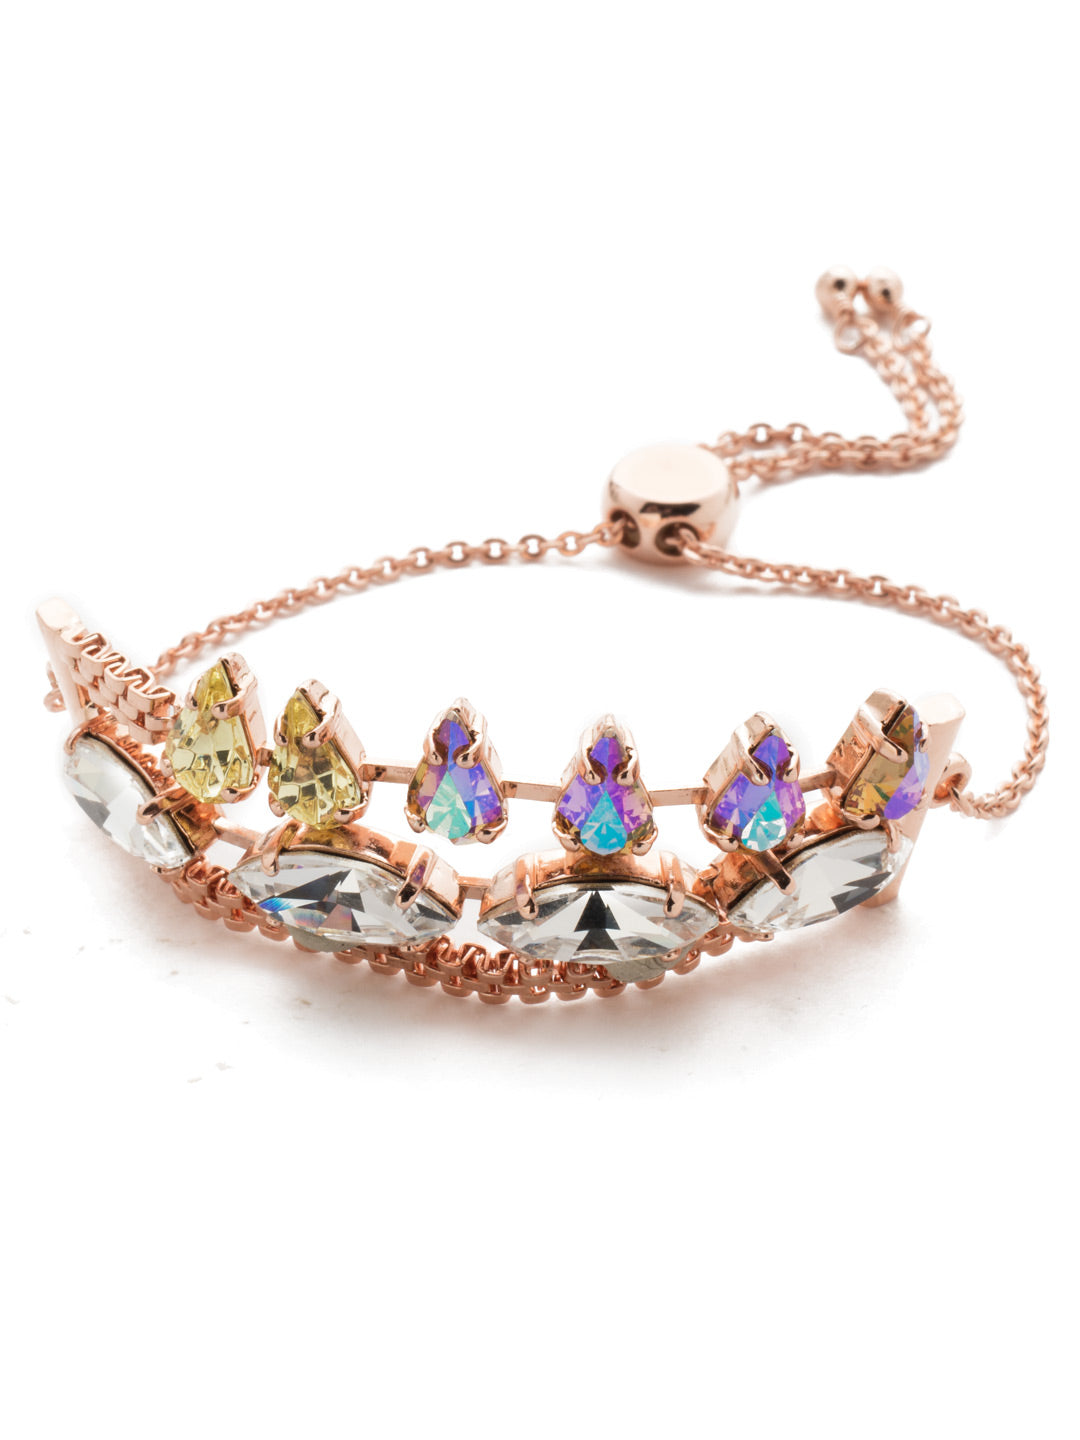 Arya Slider Bracelet - BEF6RGROG - <p>A mesmerizing glimmer of stacked marquise and teardrop crystals atop a weightless metal band dainty in appearance. This piece is sure to be the center of attention at any party and can be easily adjusted to create your own ideal fit. From Sorrelli's Rose Garden  collection in our Rose Gold-tone finish.</p>